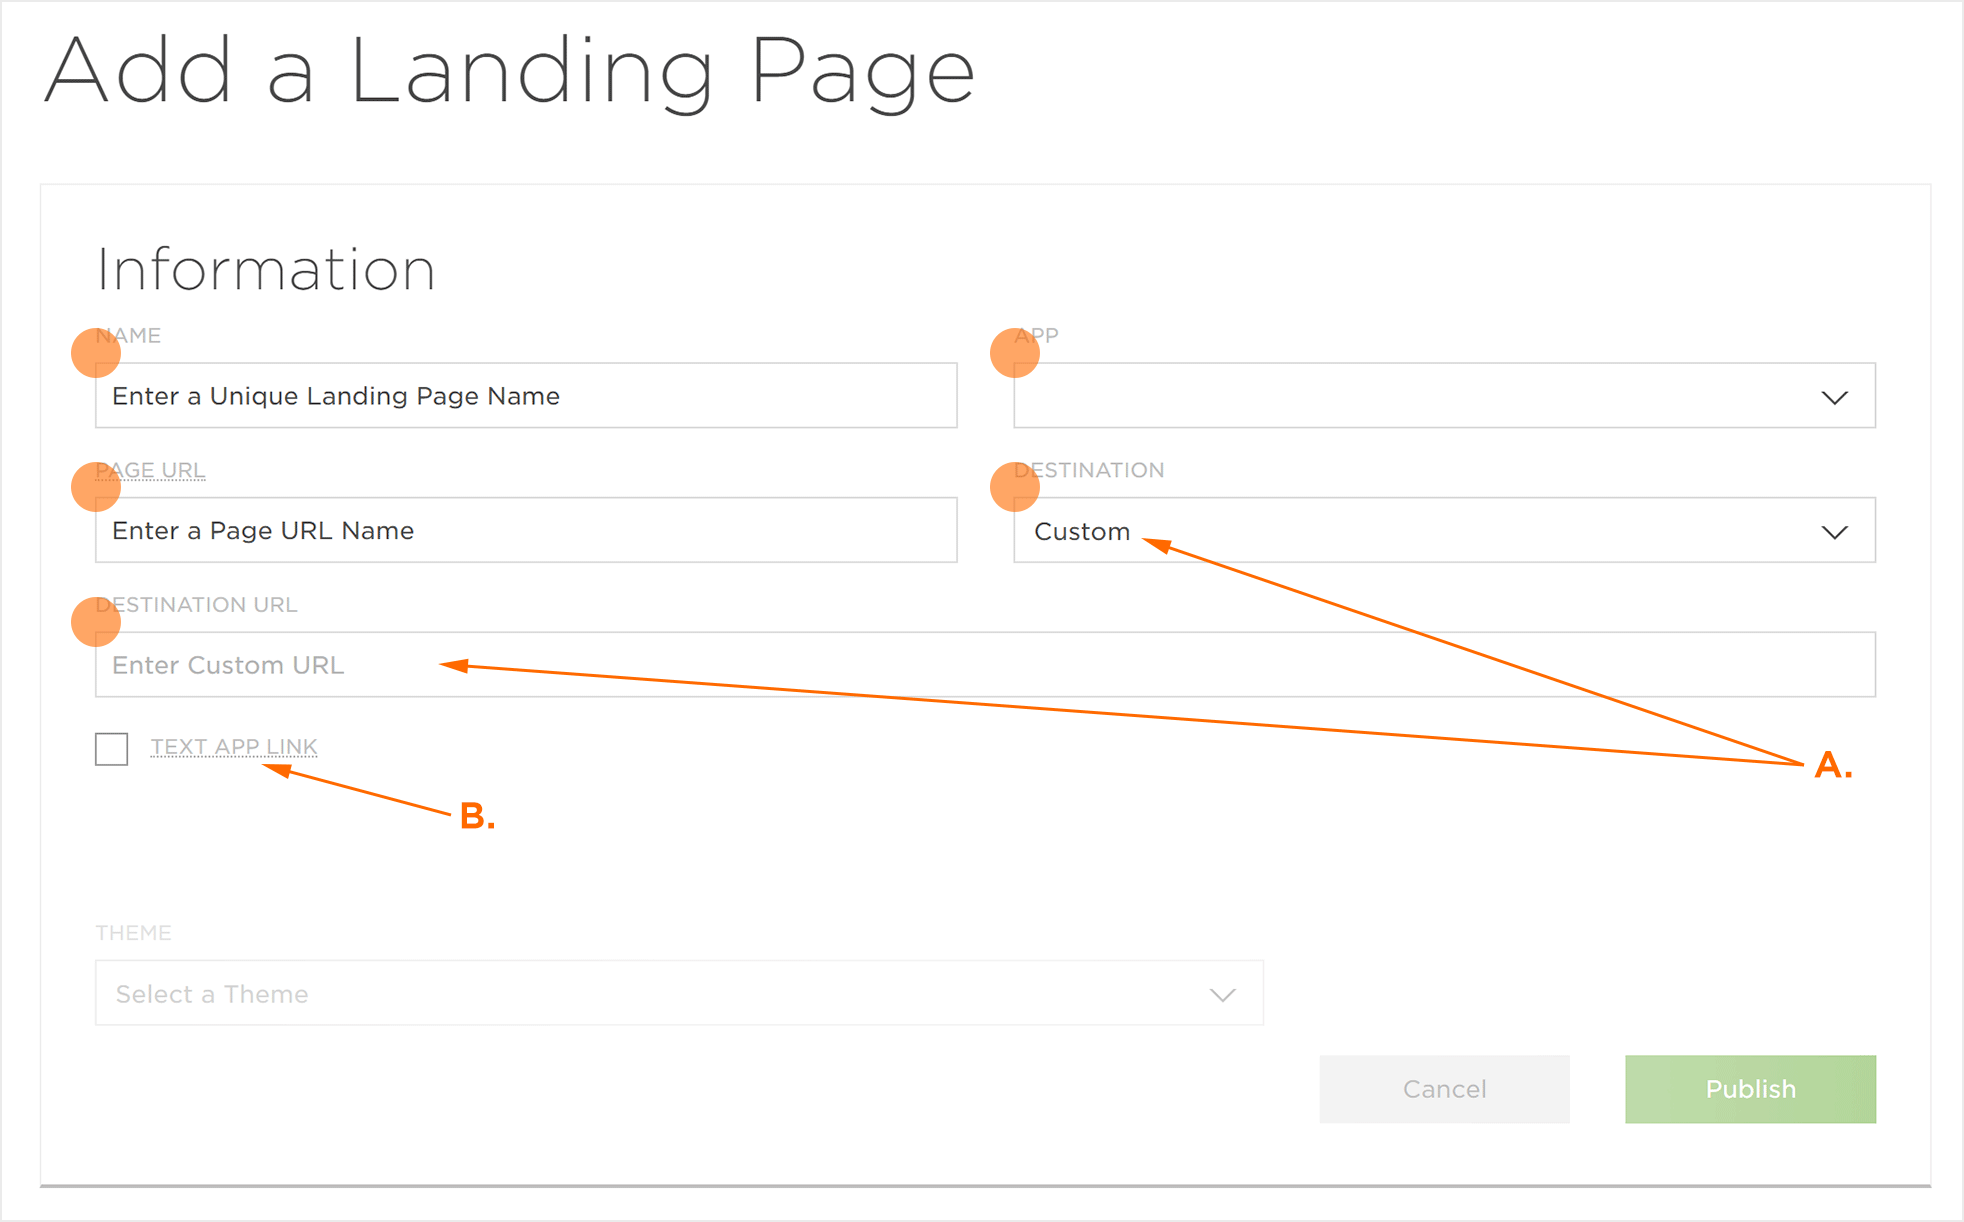 Add a Landing Page General Settings